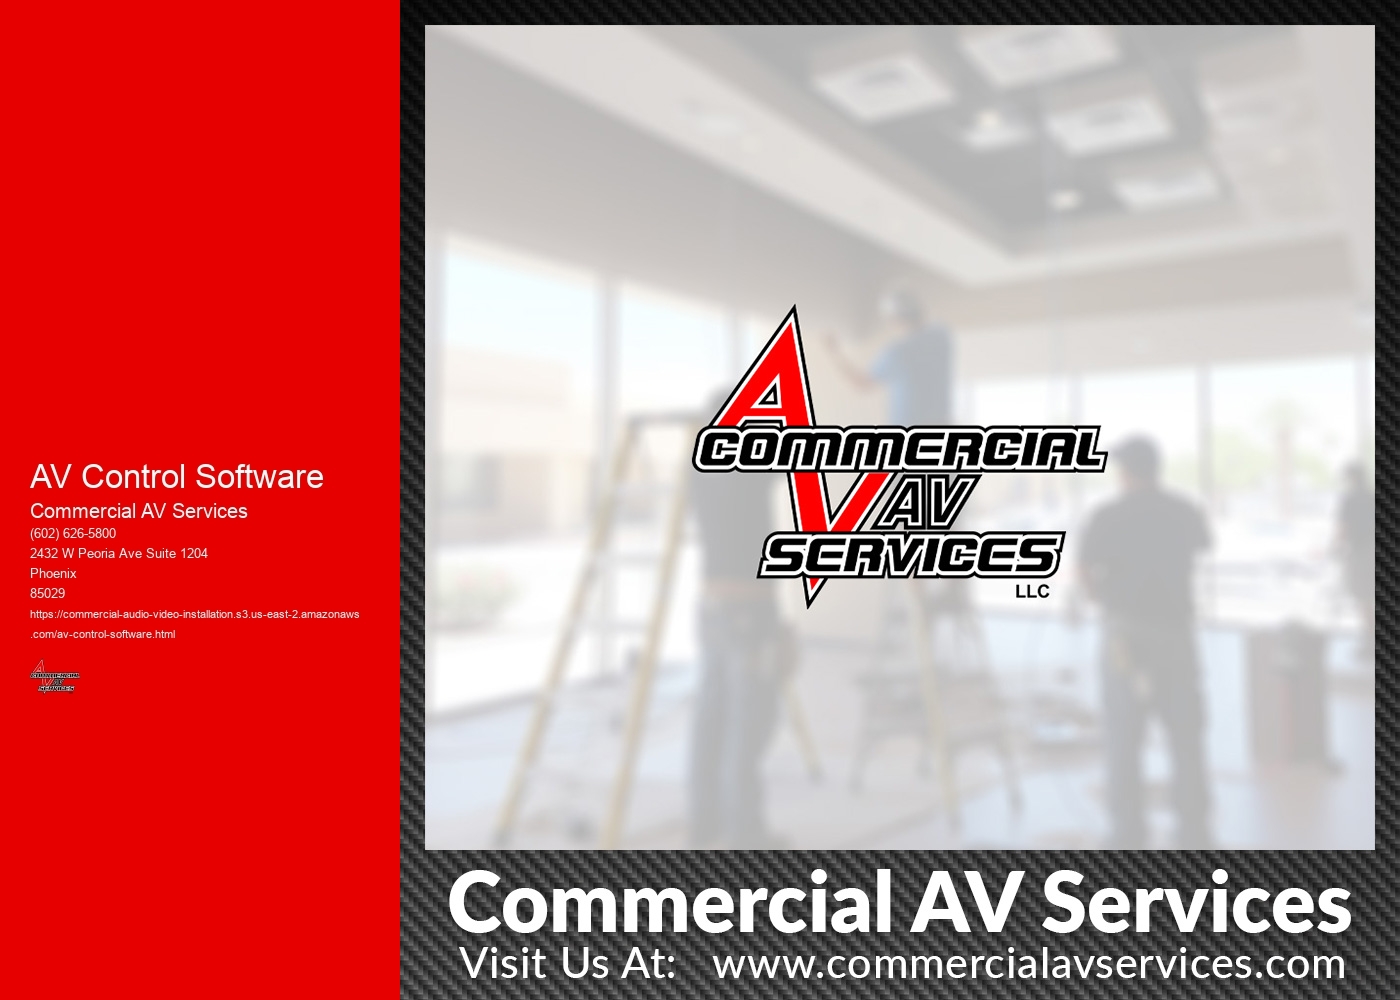 How can AV control software help in automating and simplifying complex audiovisual setups and configurations?